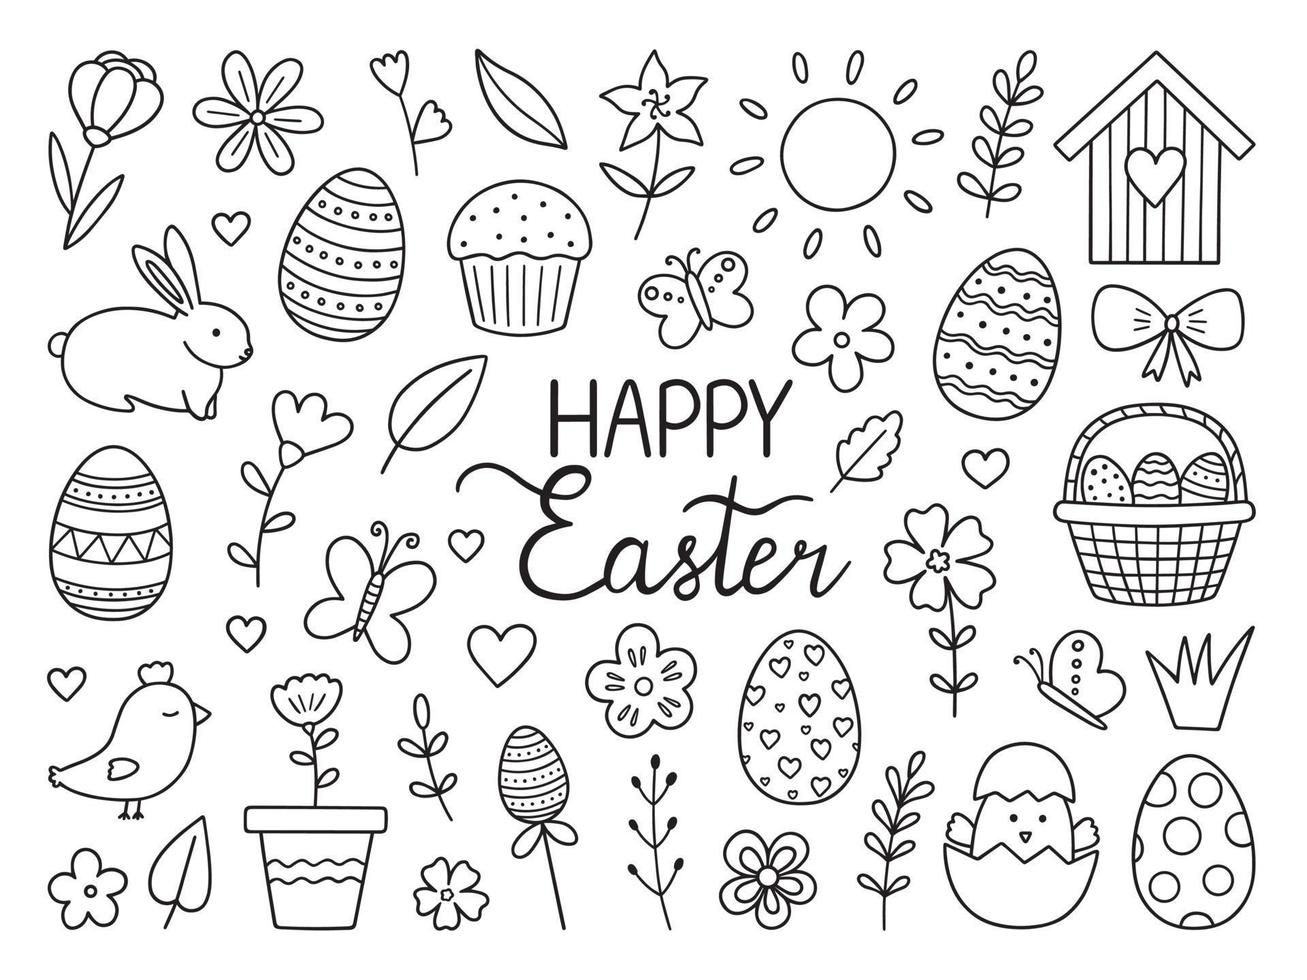 Happy Easter doodle set. Easter bunny, butterflies, chick, eggs, branches, flowers in sketch style.  Vector illustration isolated on white background.